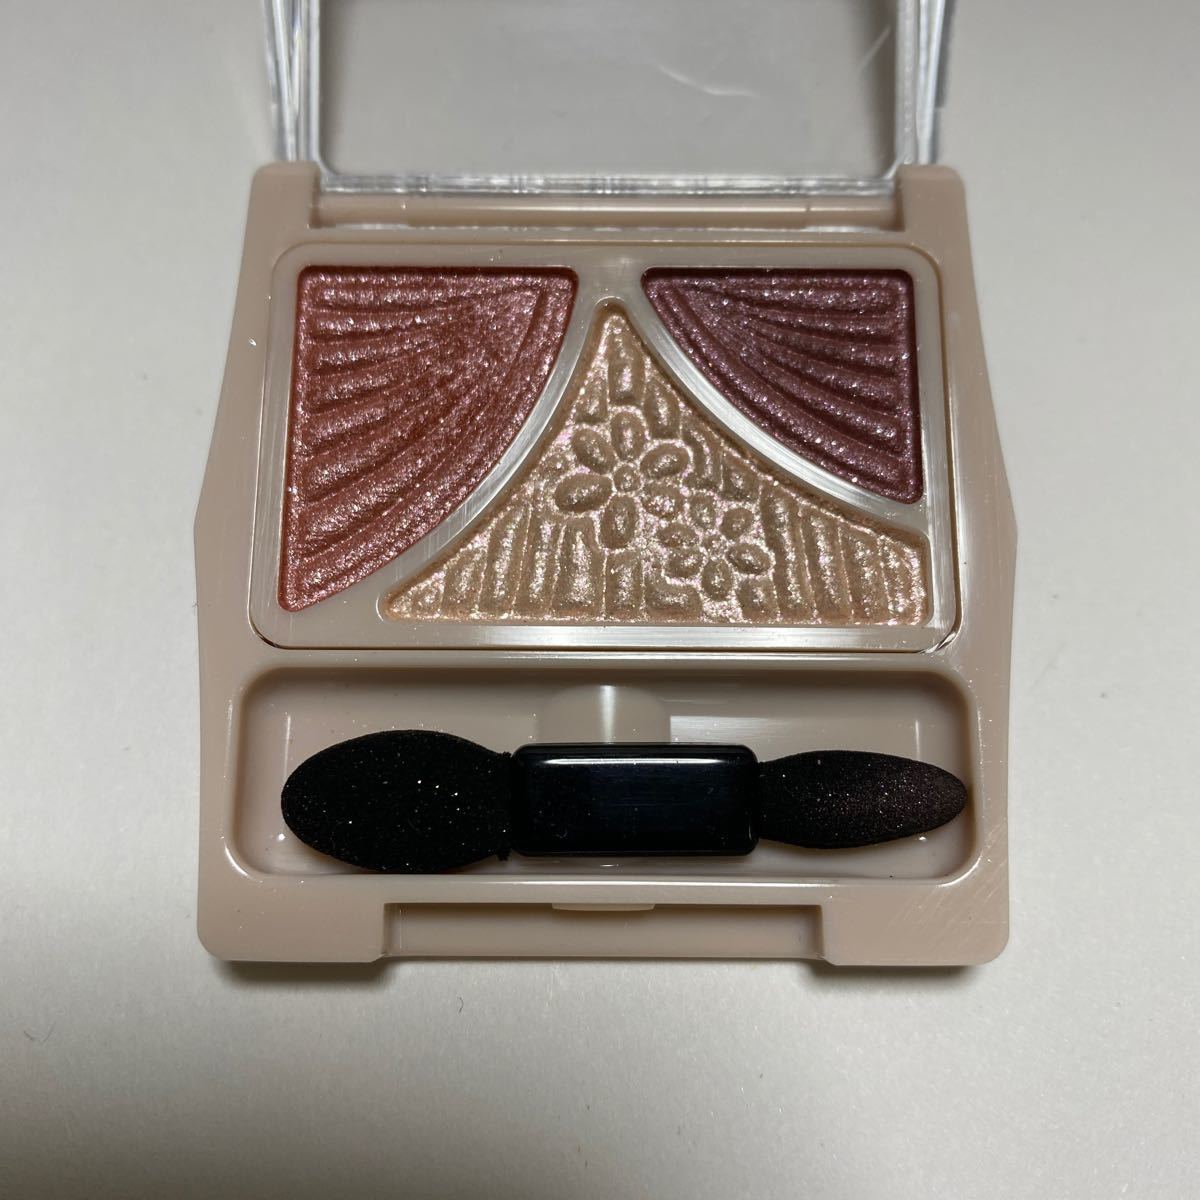  can make-up ju-si- pure I z14 eyeshadow I color 